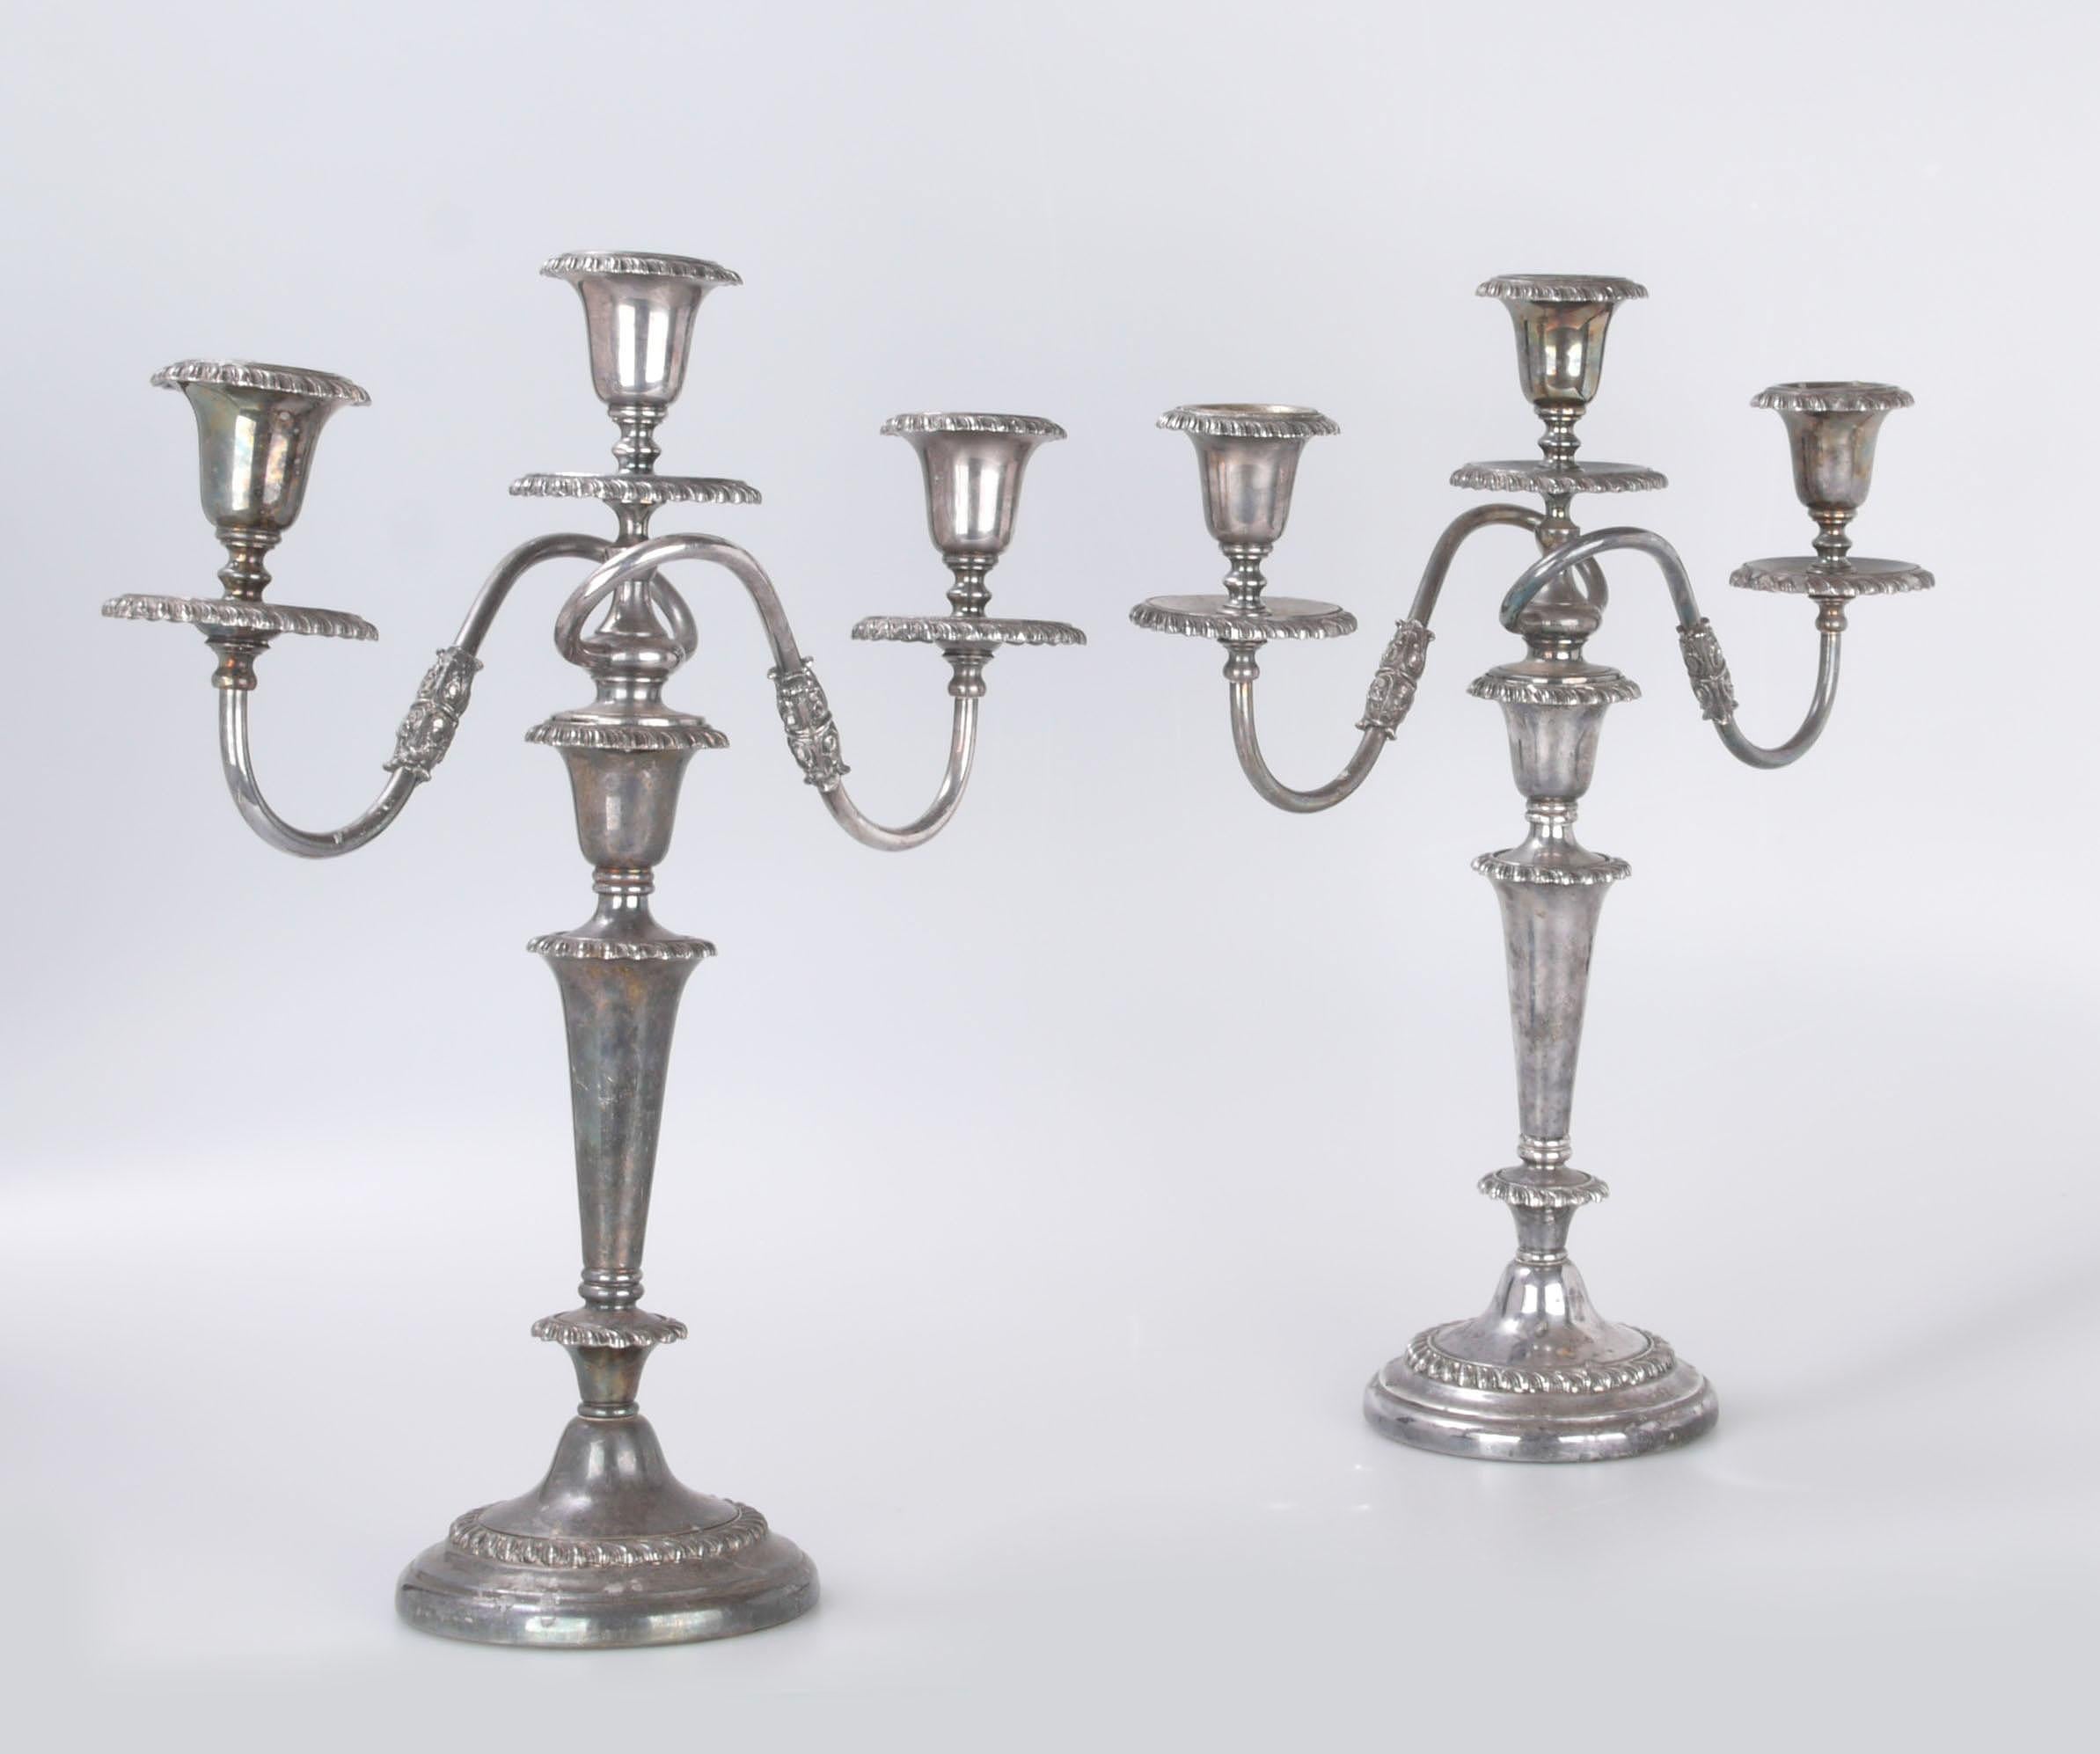 A pair of Victorian Friedman silver plated three-arm convertible candleholders or candelabras.
Each piece has the capacity to hold either three lights or just one (with the removal of the topmost piece, as shown in picture).
Friedman mark on the